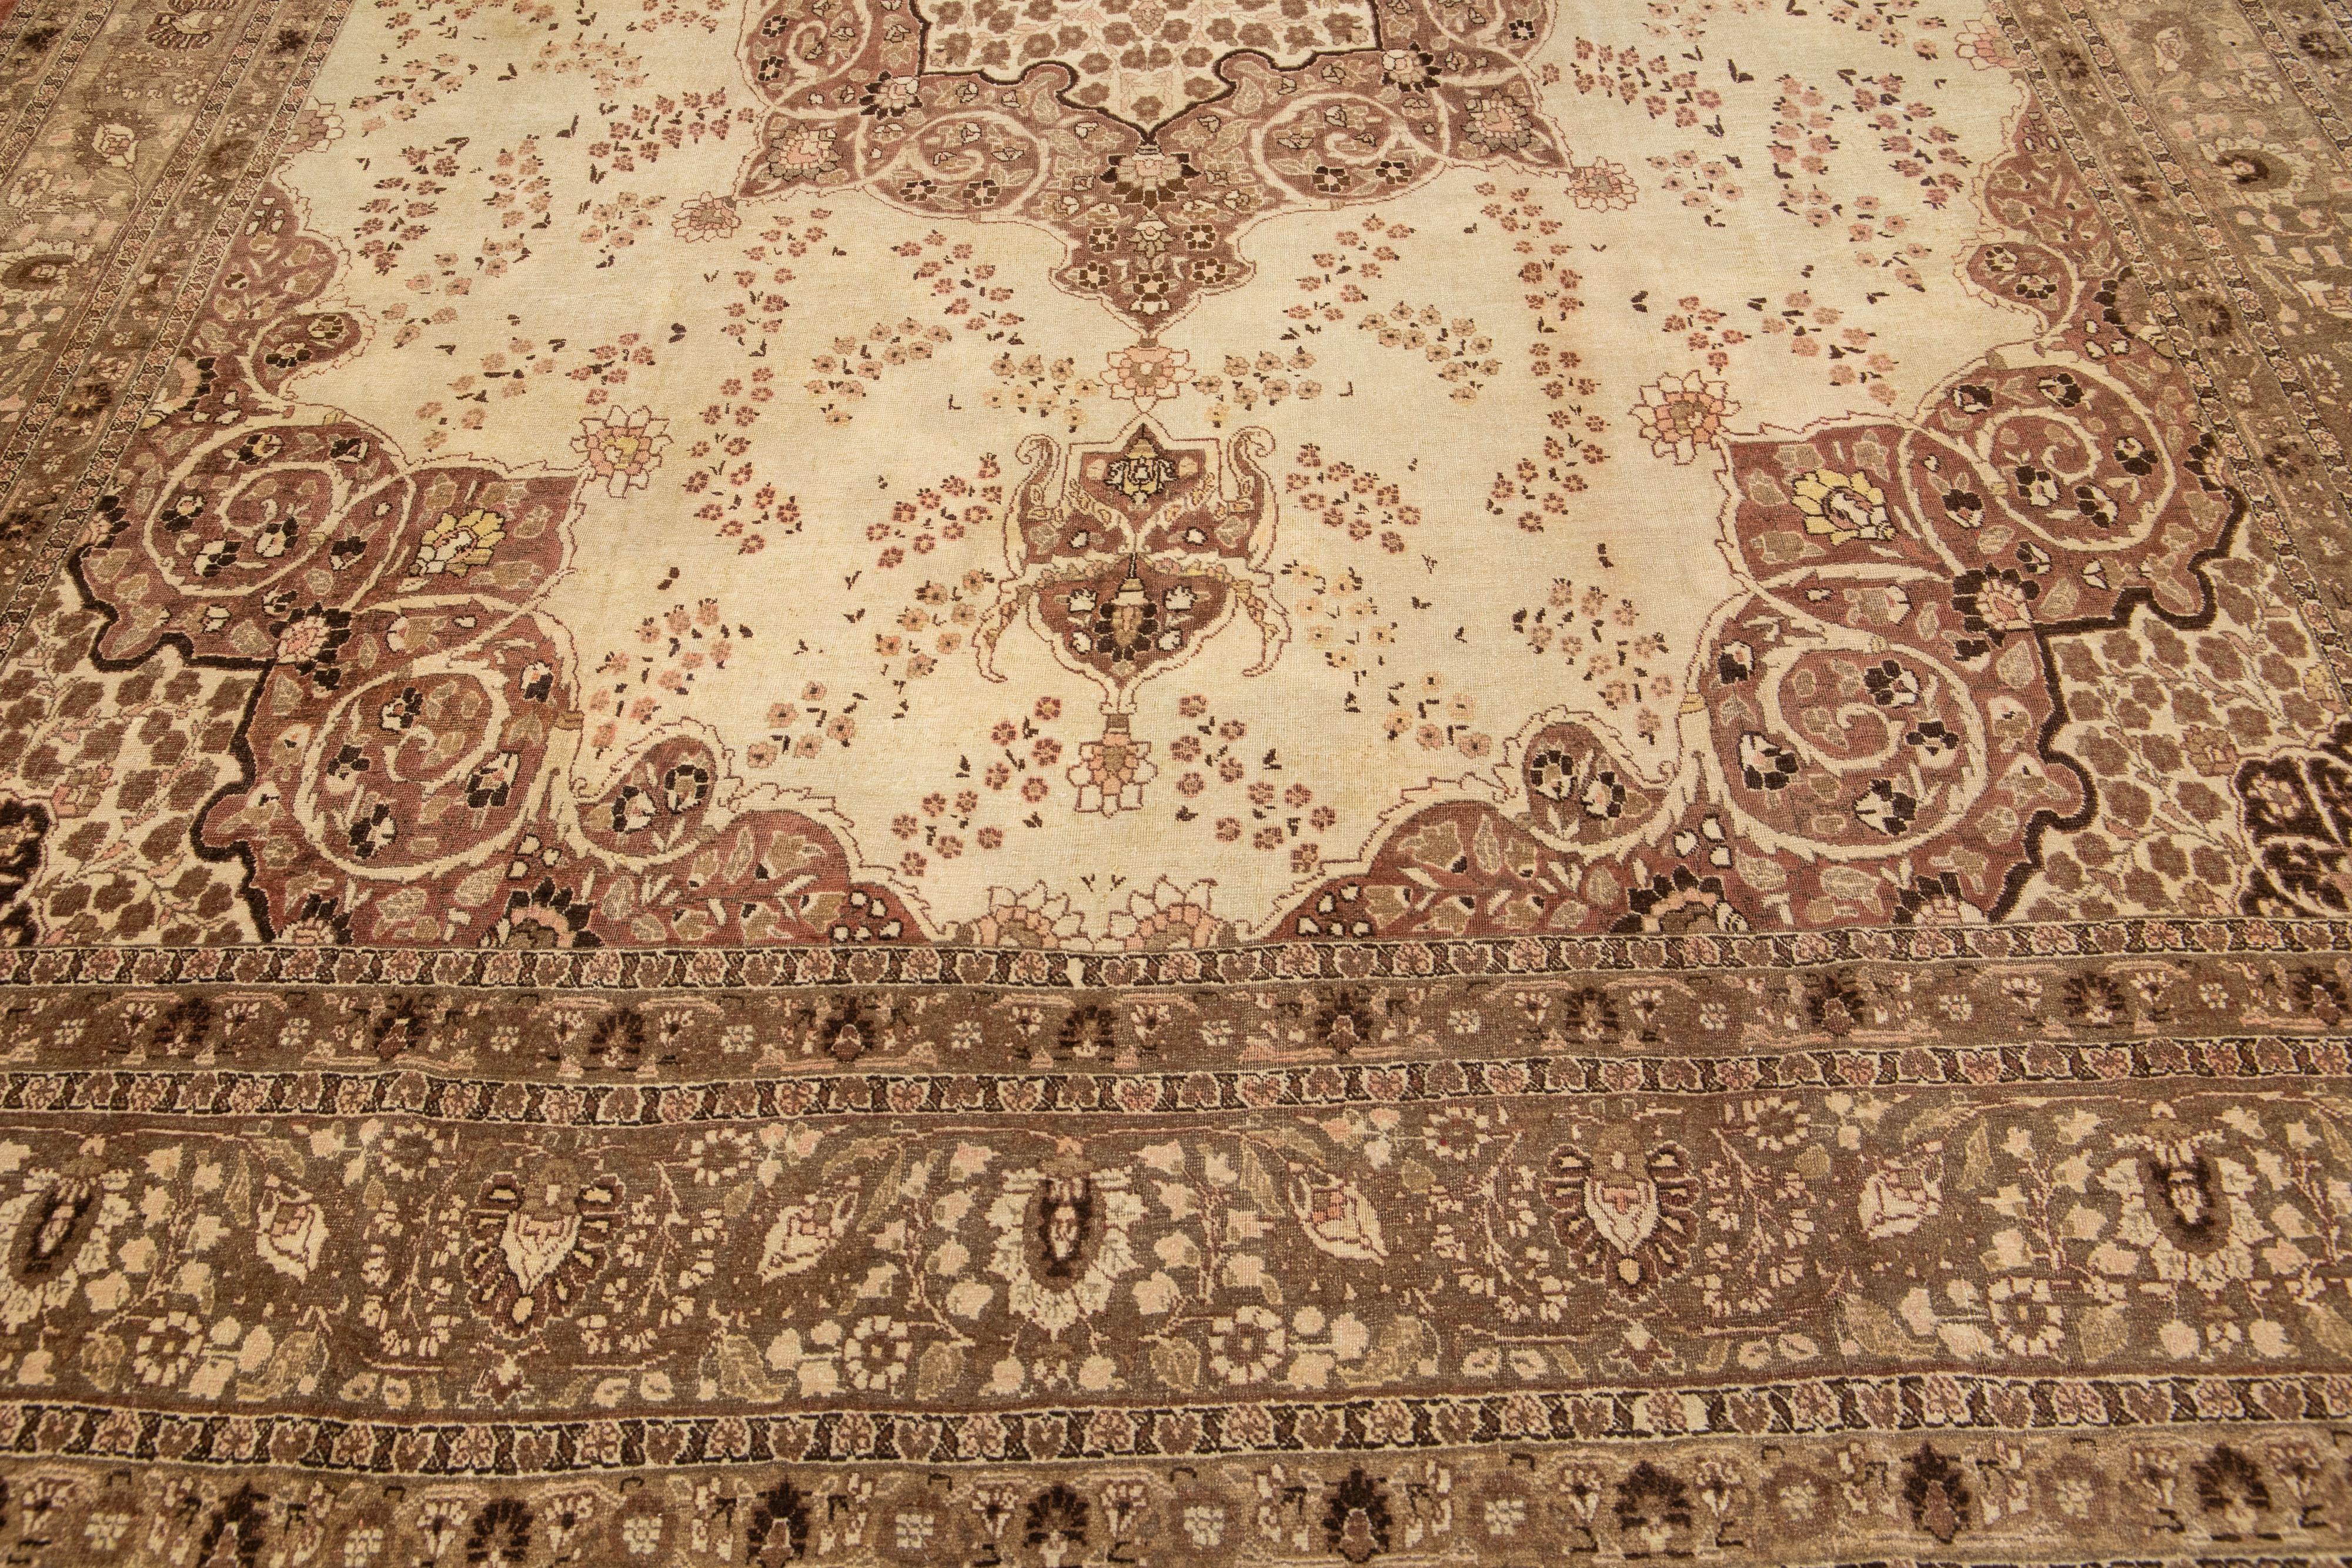 This exceptional Persian Tabriz wool rug showcases an exquisite traditional floral medallion design with a striking peach accent against a beige and brown background. Being meticulously created by hand-knotting, this antique rug is a splendid